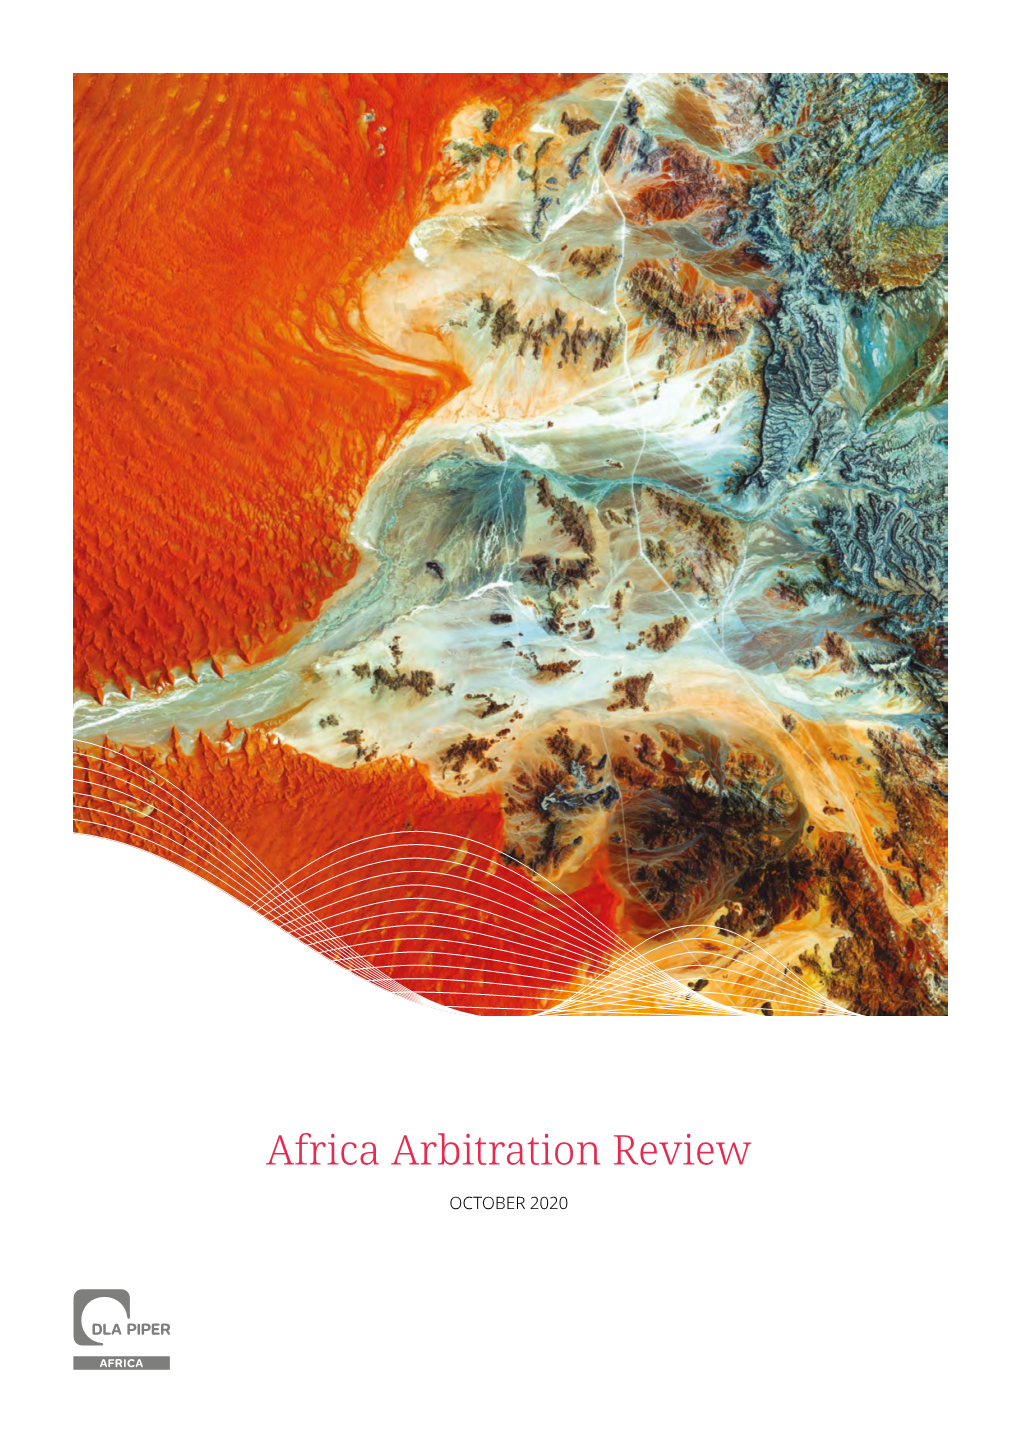 Africa Arbitration Review